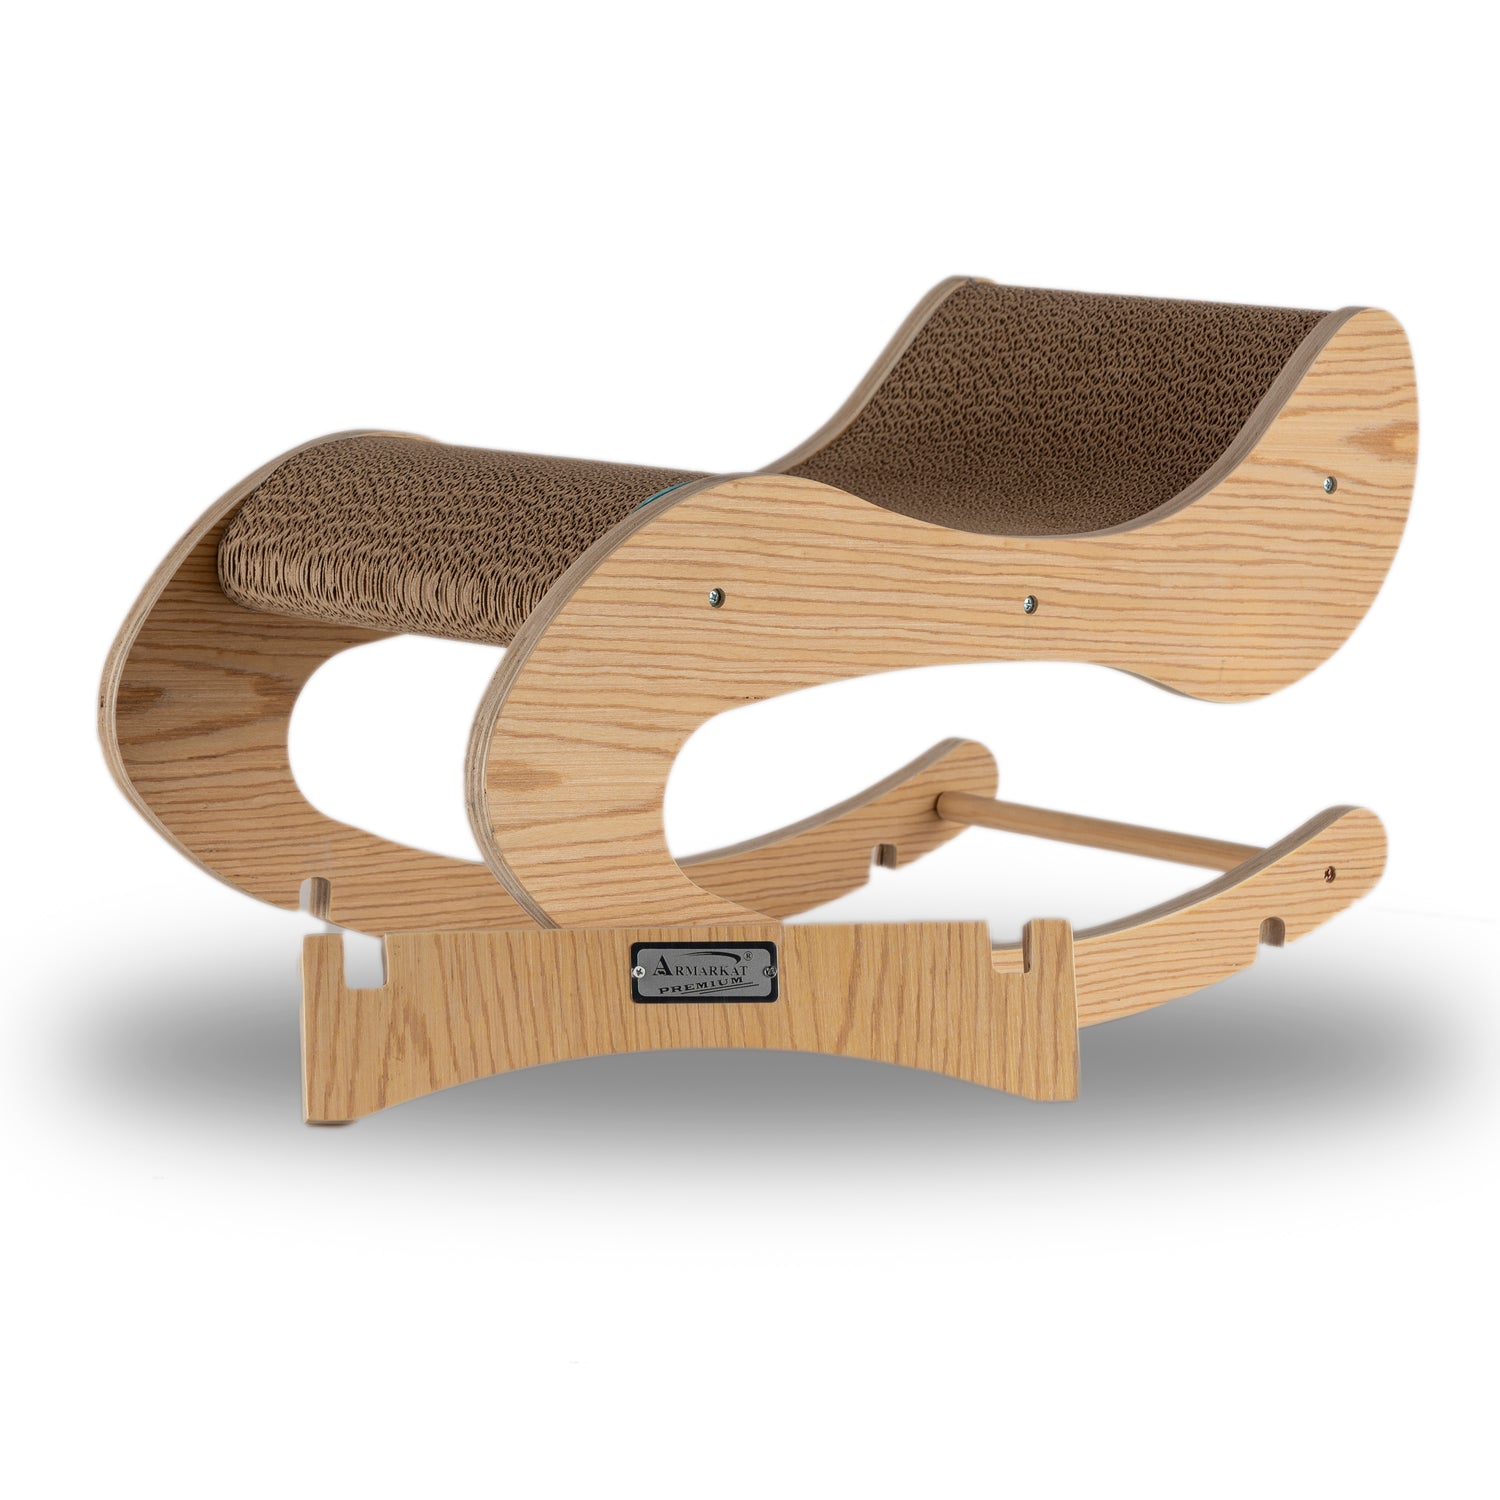 Armarkat Cat Swing Chair, Cat Sofa Bed, Cat Swing Bed for Cats, Cat Rolling Scratcher, Solid Wood Scratcher, S1302